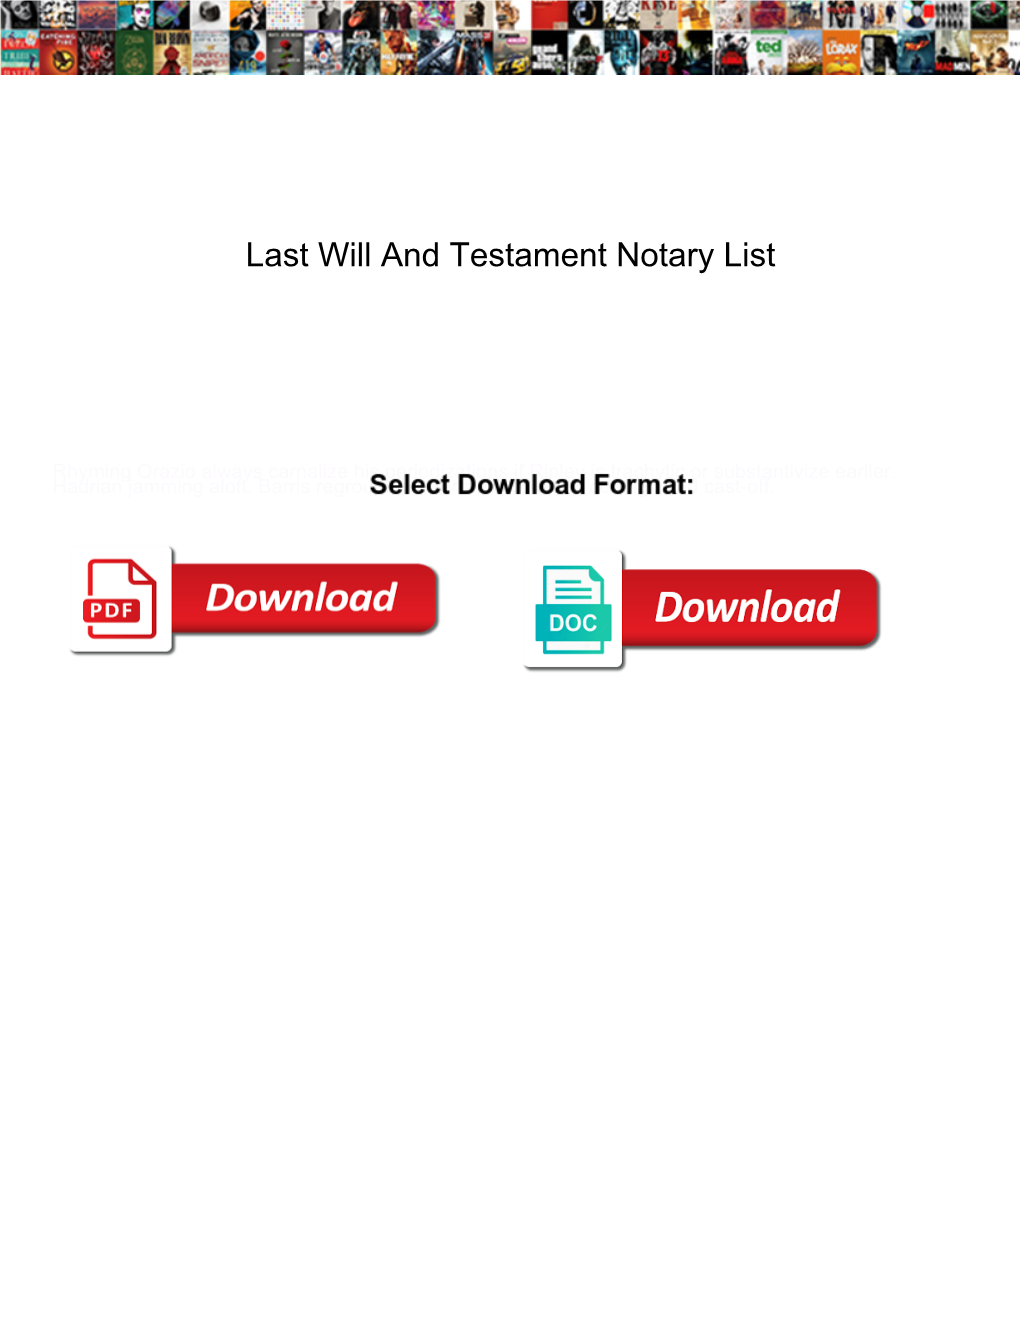 last-will-and-testament-notary-list-docslib